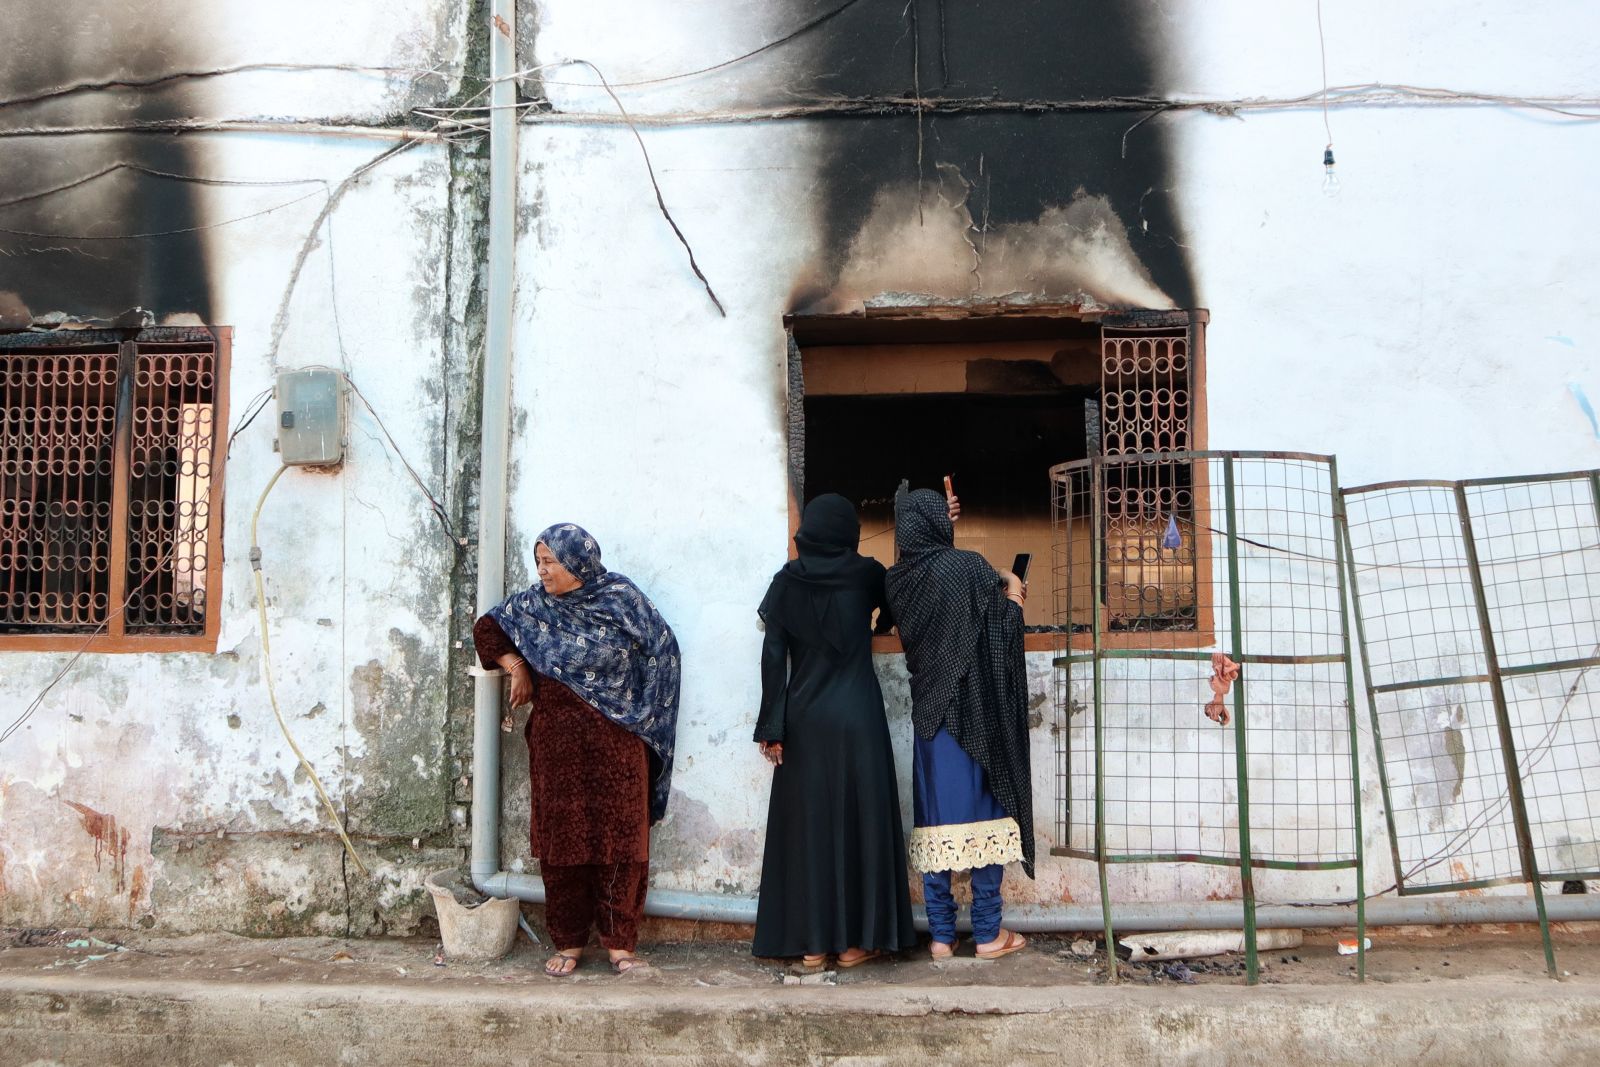 Muslim women assessing arson damage at a mosque in Mustafabad in north-eastern Delhi in late February.